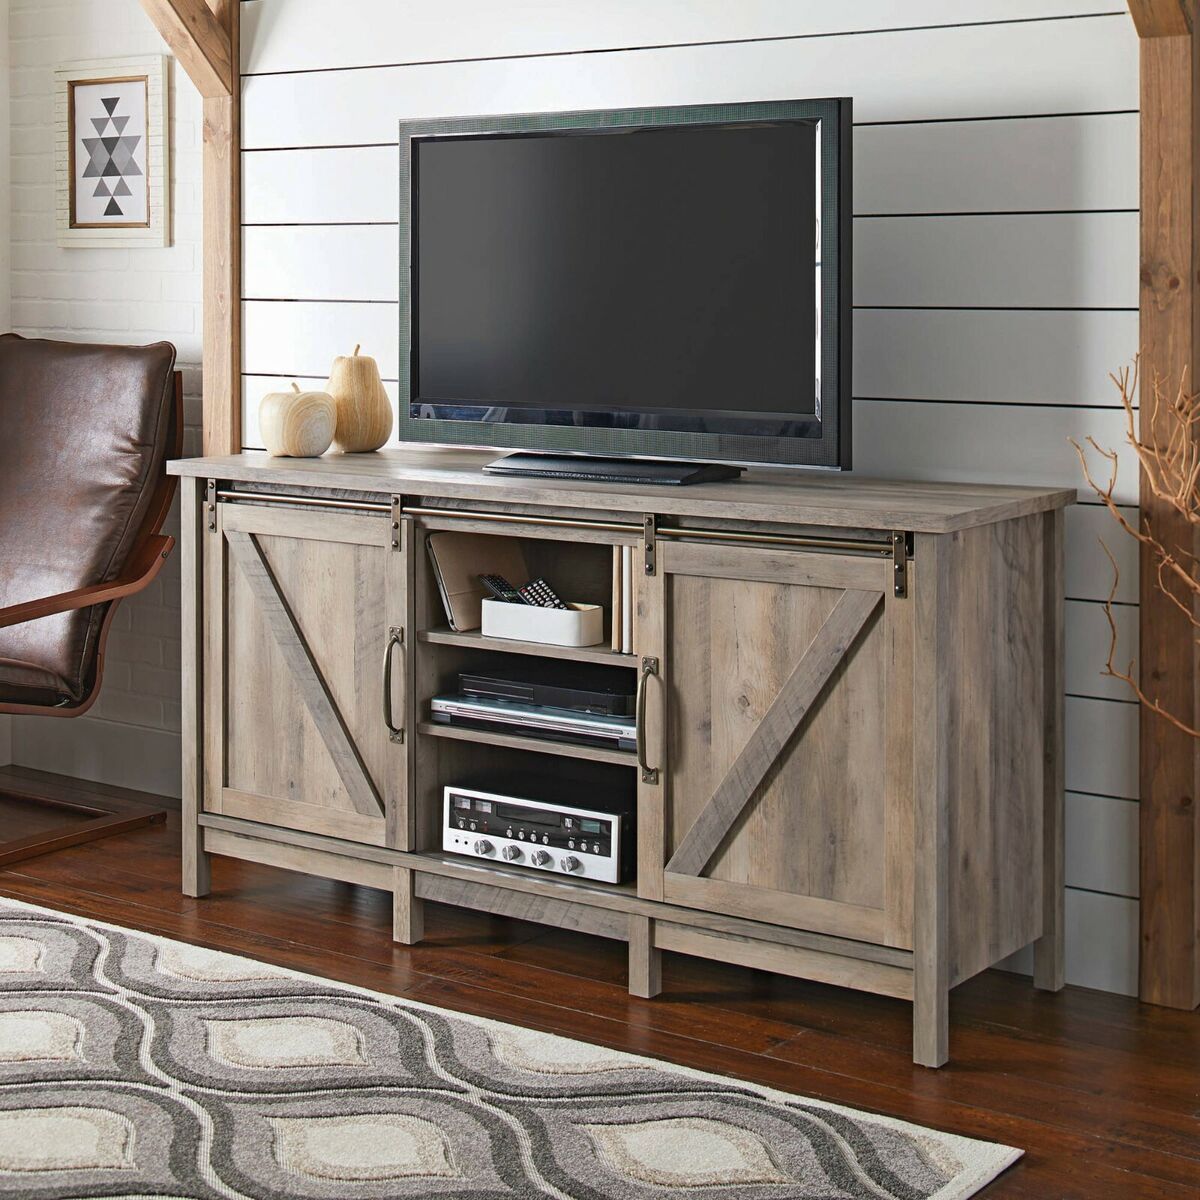 Better Homes And Gardens Modern Farmhouse Tv Stand For Tvs Up To 70", Rustic  Gra | Ebay Throughout Modern Farmhouse Rustic Tv Stands (View 2 of 15)